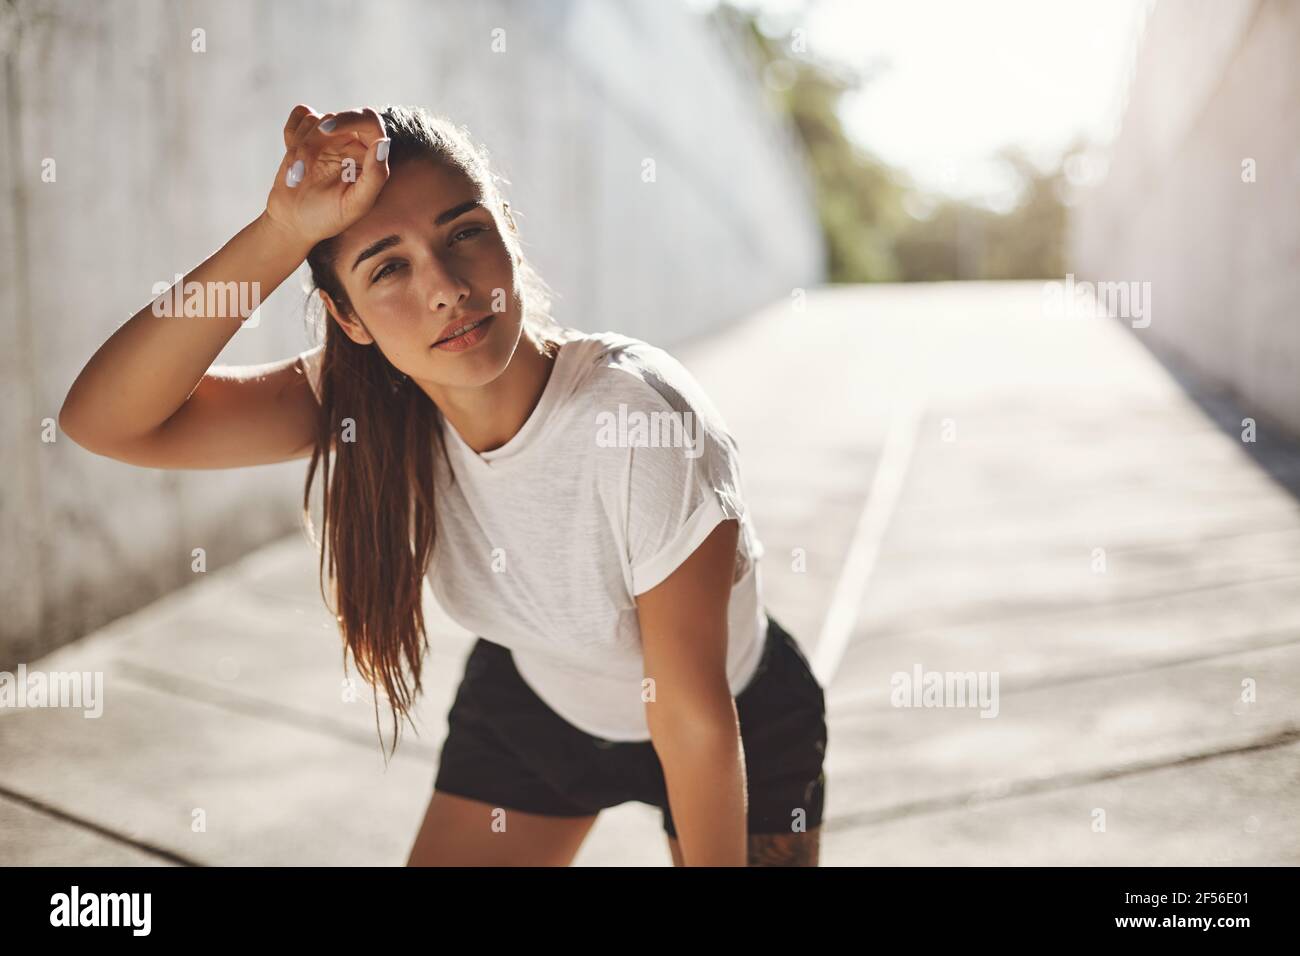 Sport, urban fitness and workout concept. Fit female athlete feel slight fatigue after morning run, wipe sweat from forehead taking breath before next Stock Photo